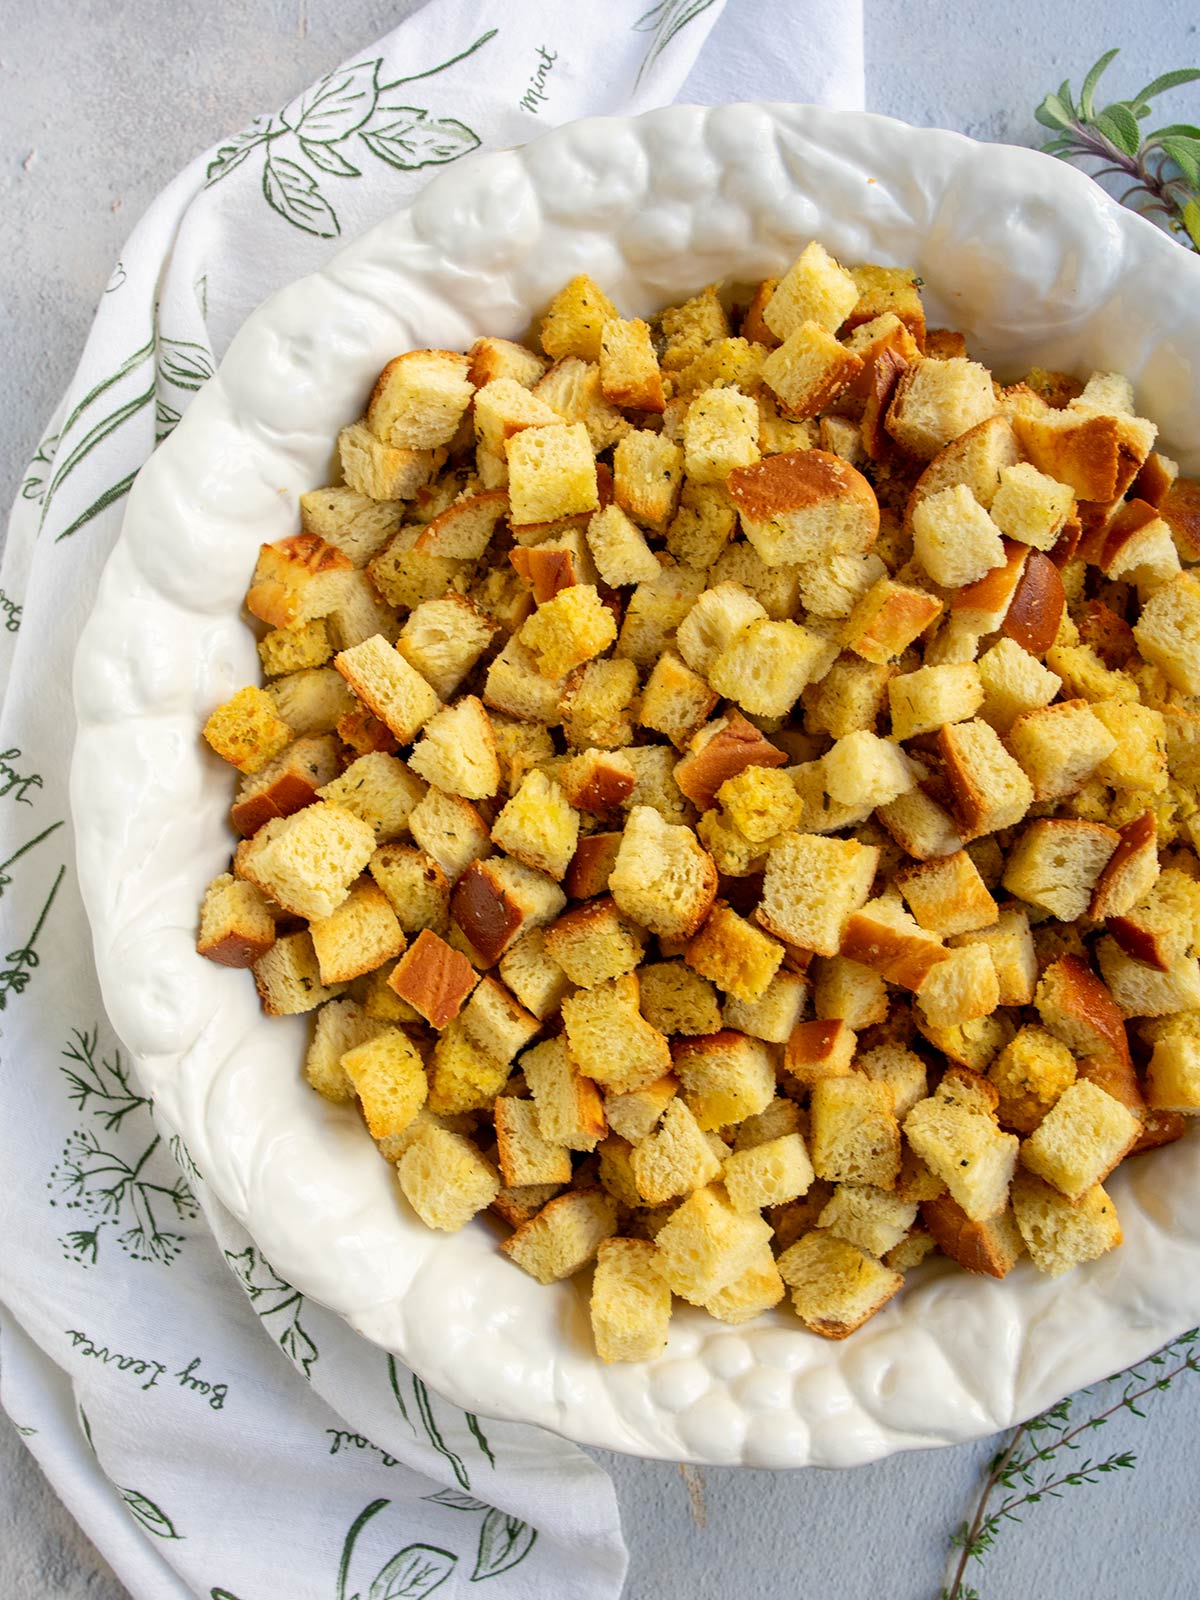 Cornbread and challah stuffing cubes in a white bowl with a herb decorated towel and fresh herbs on the side.